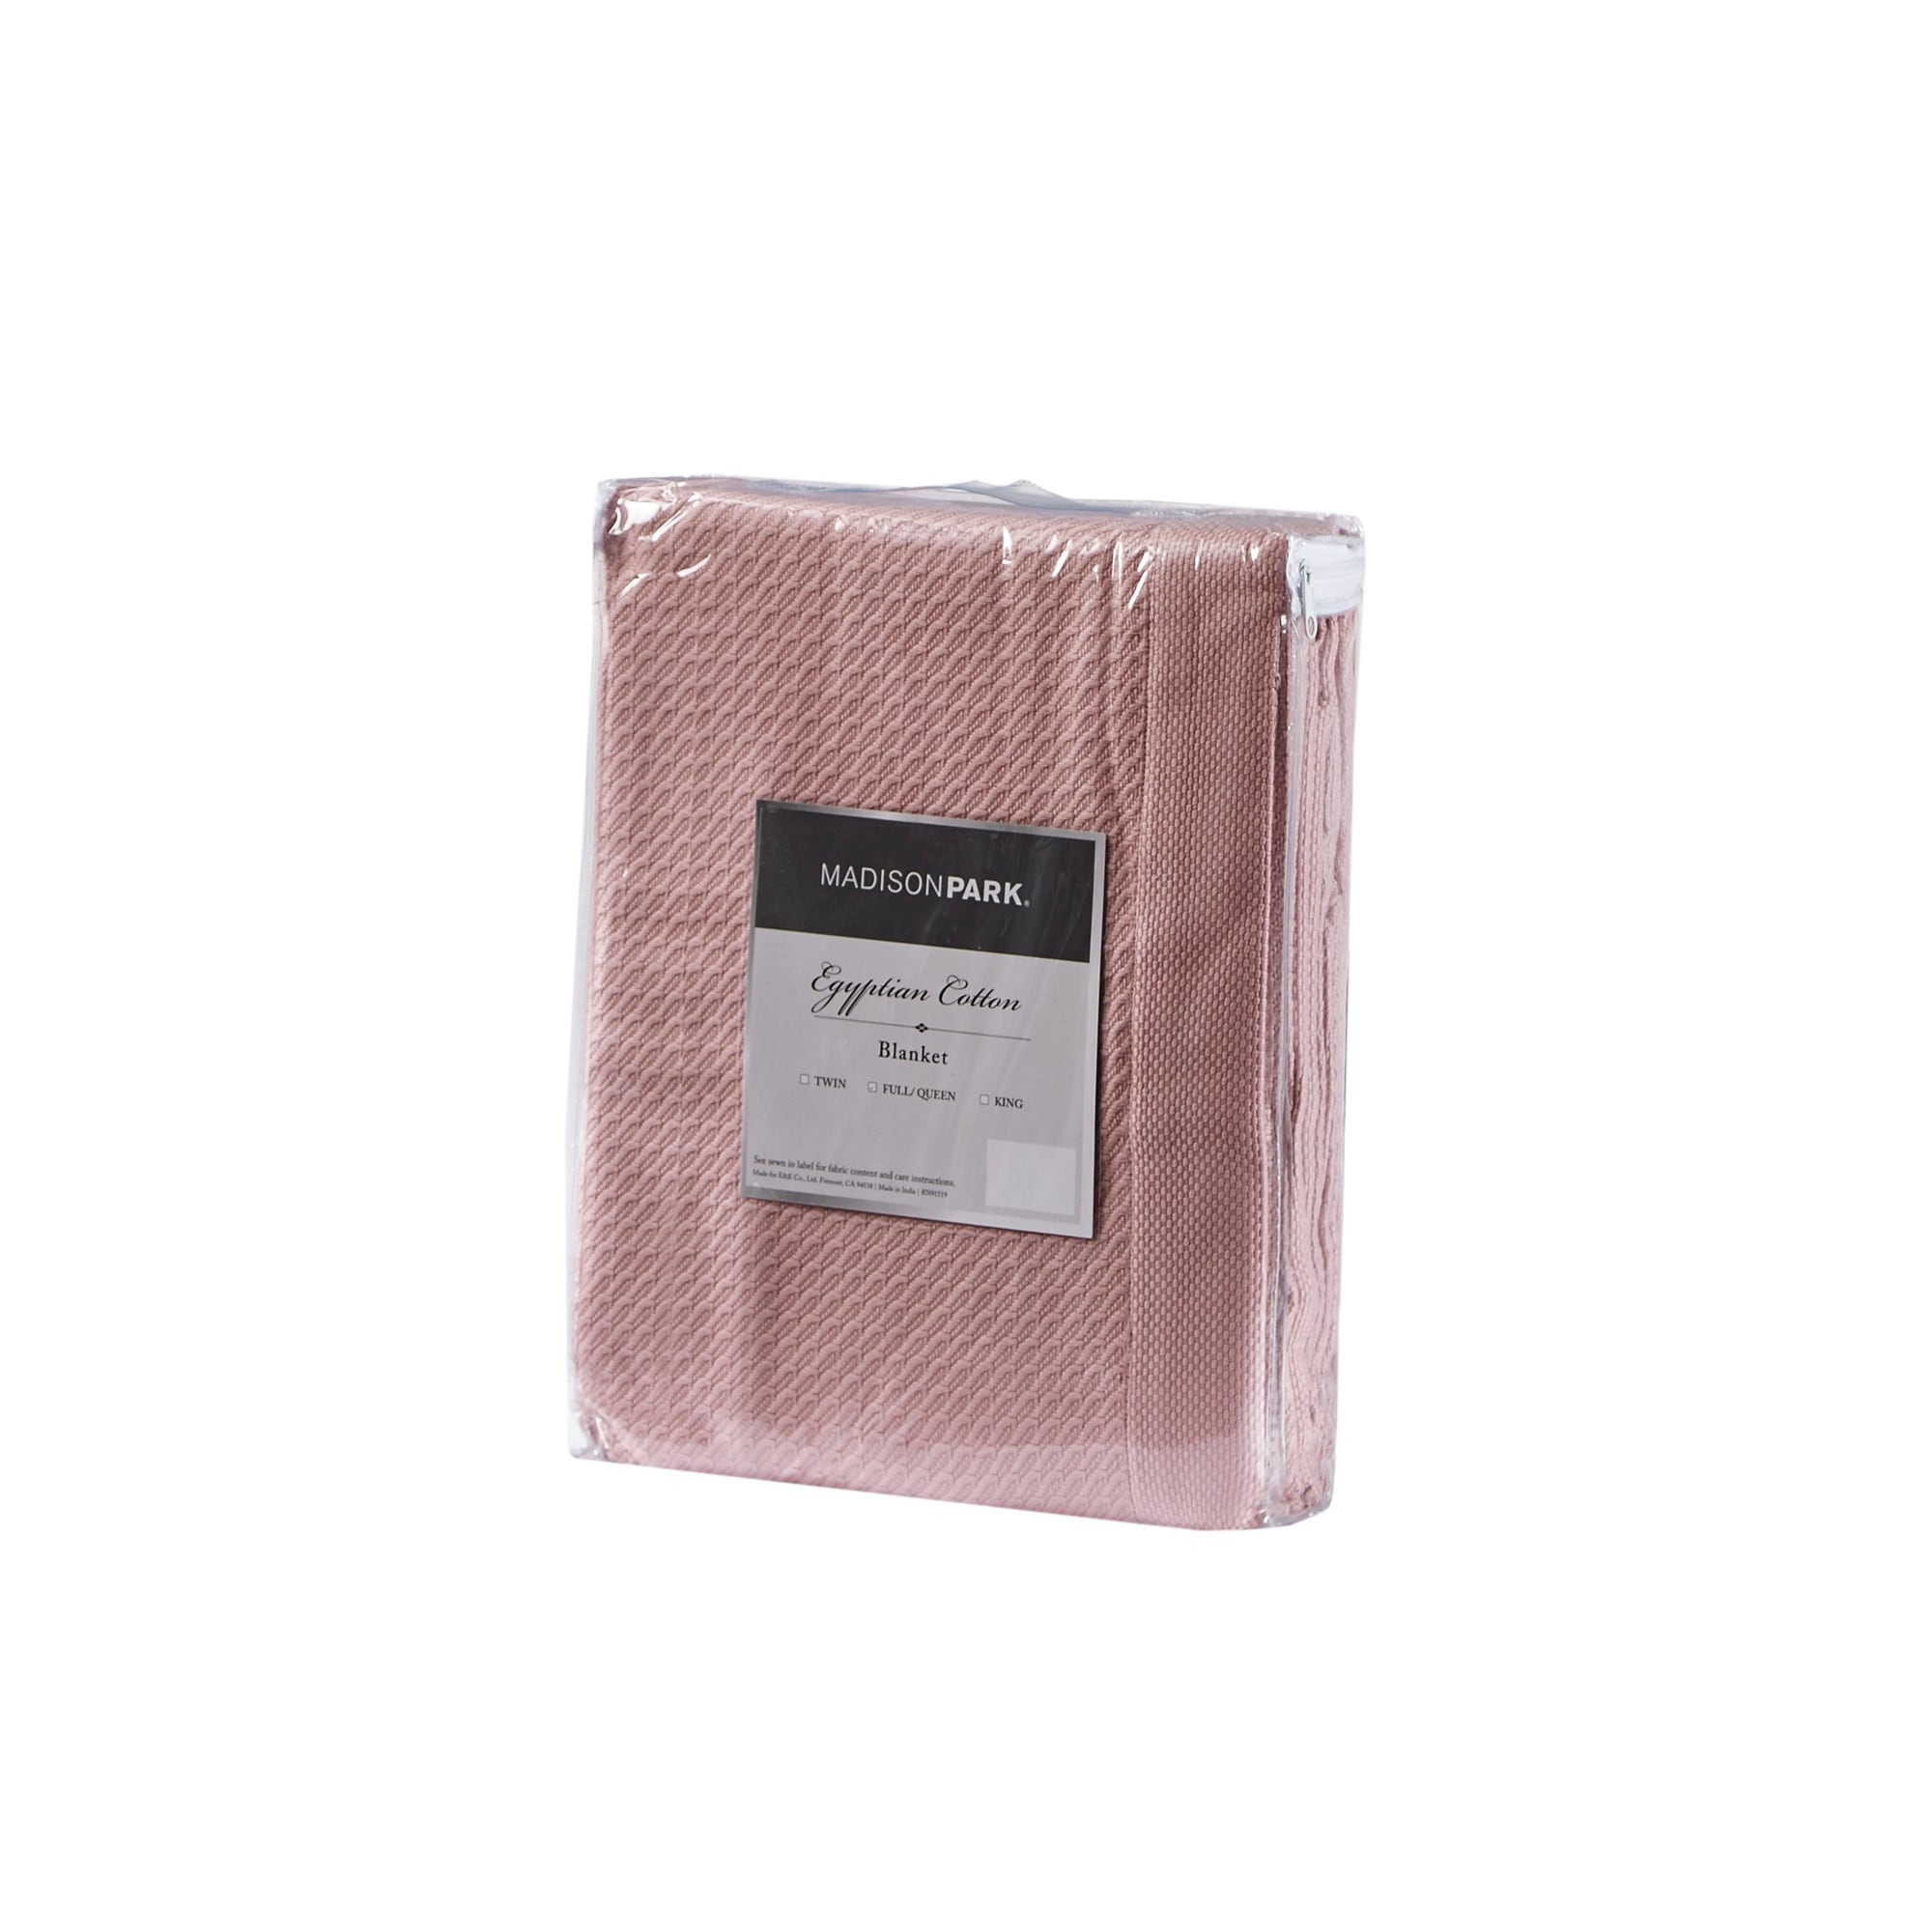 Madison Park Egyptian Cotton Solid Blanket - On Sale - Bed Bath